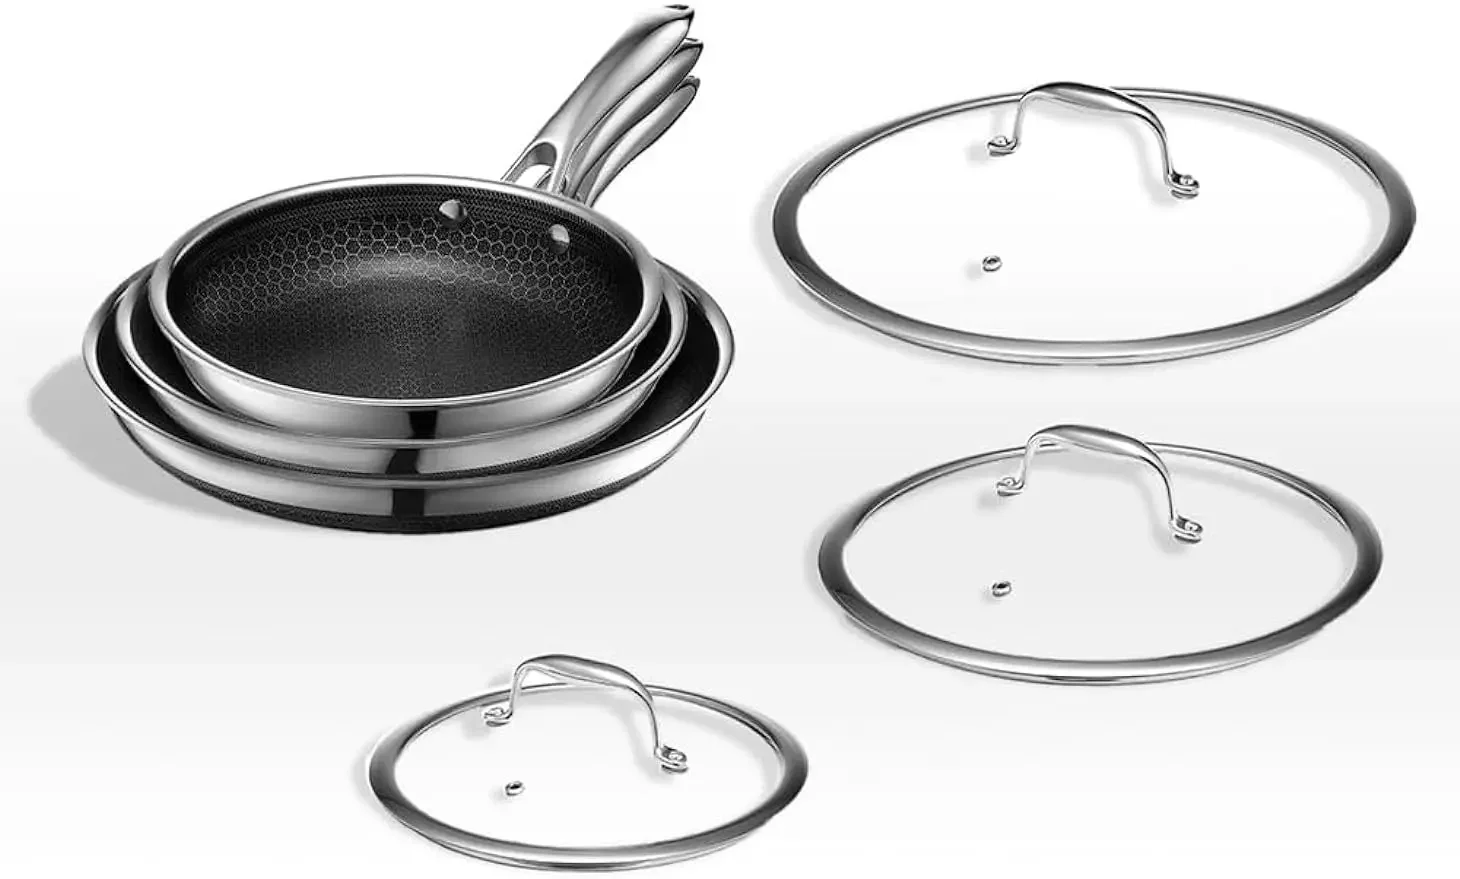 

HexClad Hybrid Nonstick Fry Pan Set, Frying Pans with Tempered Glass Lids, Stay-Cool Handles, Dis, 8 ", 10 12 6 Pcs